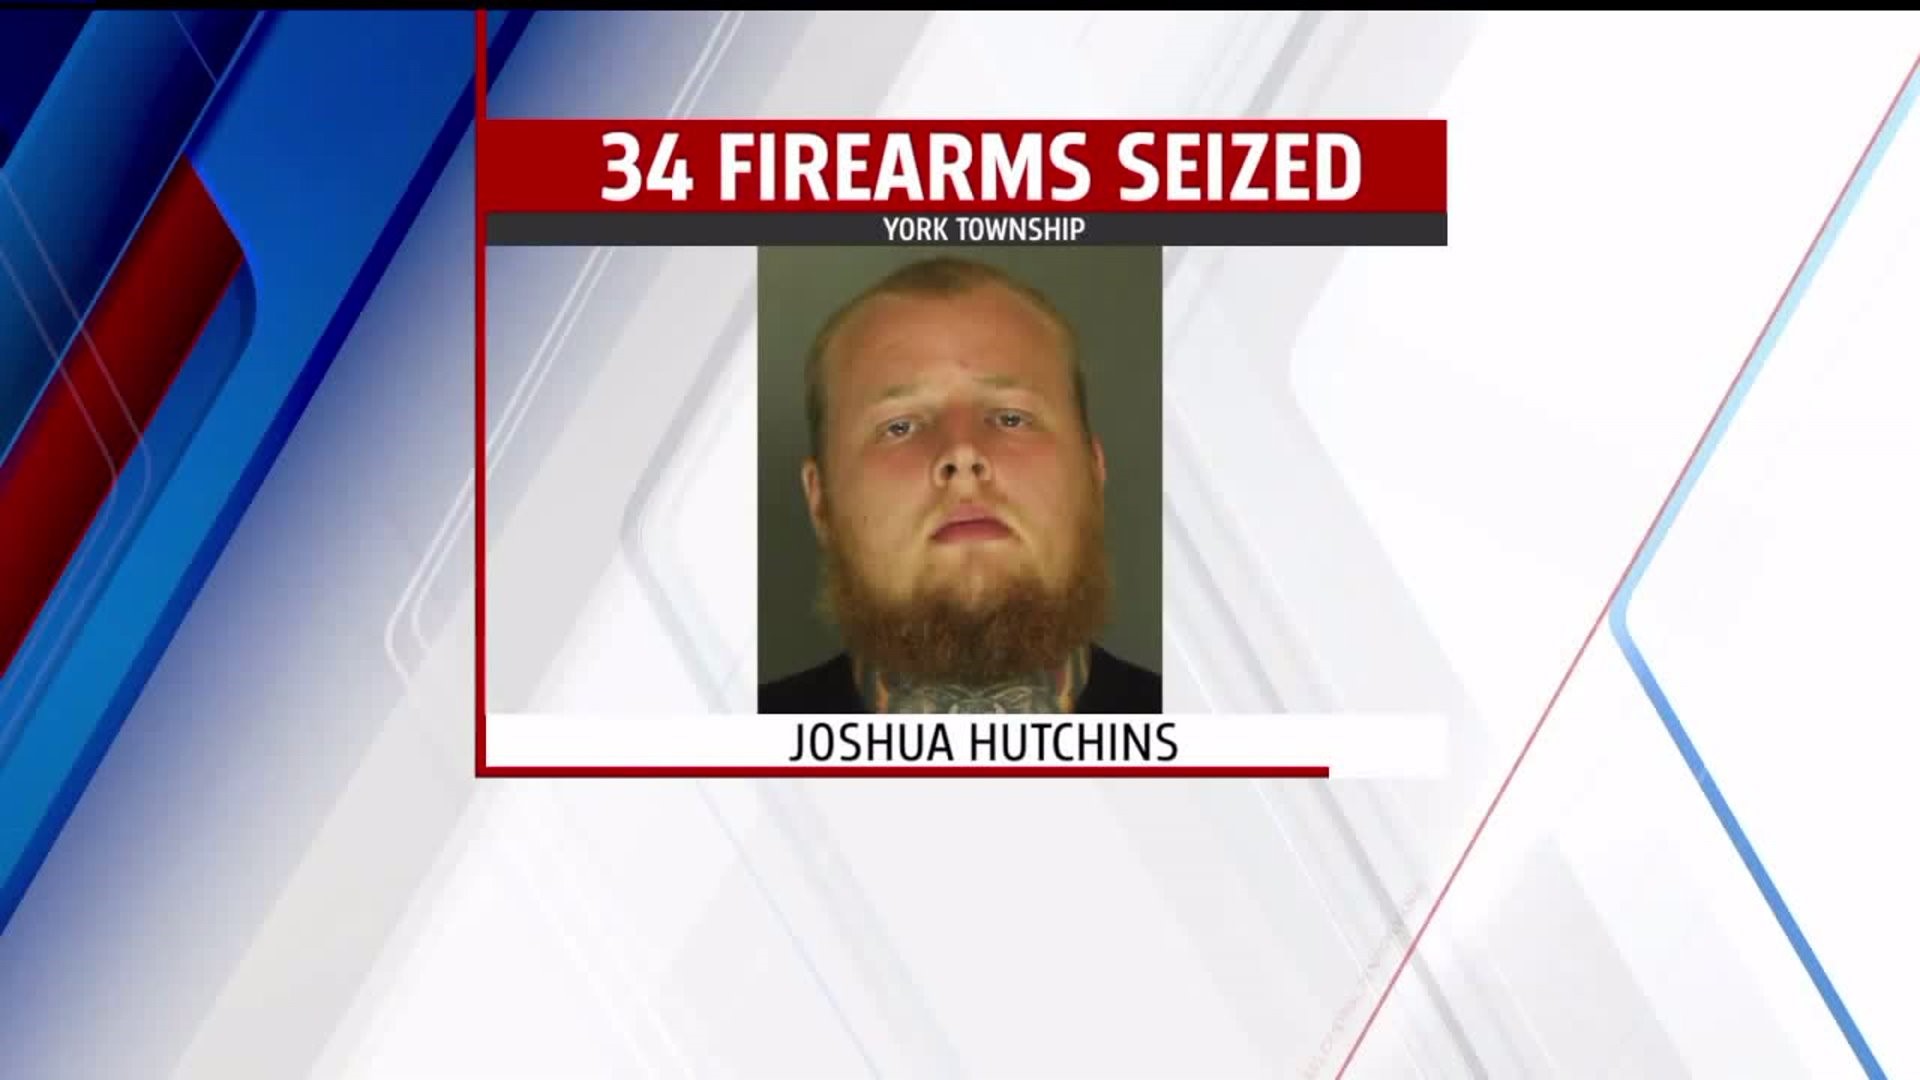 Man arrested for selling guns illegally in York